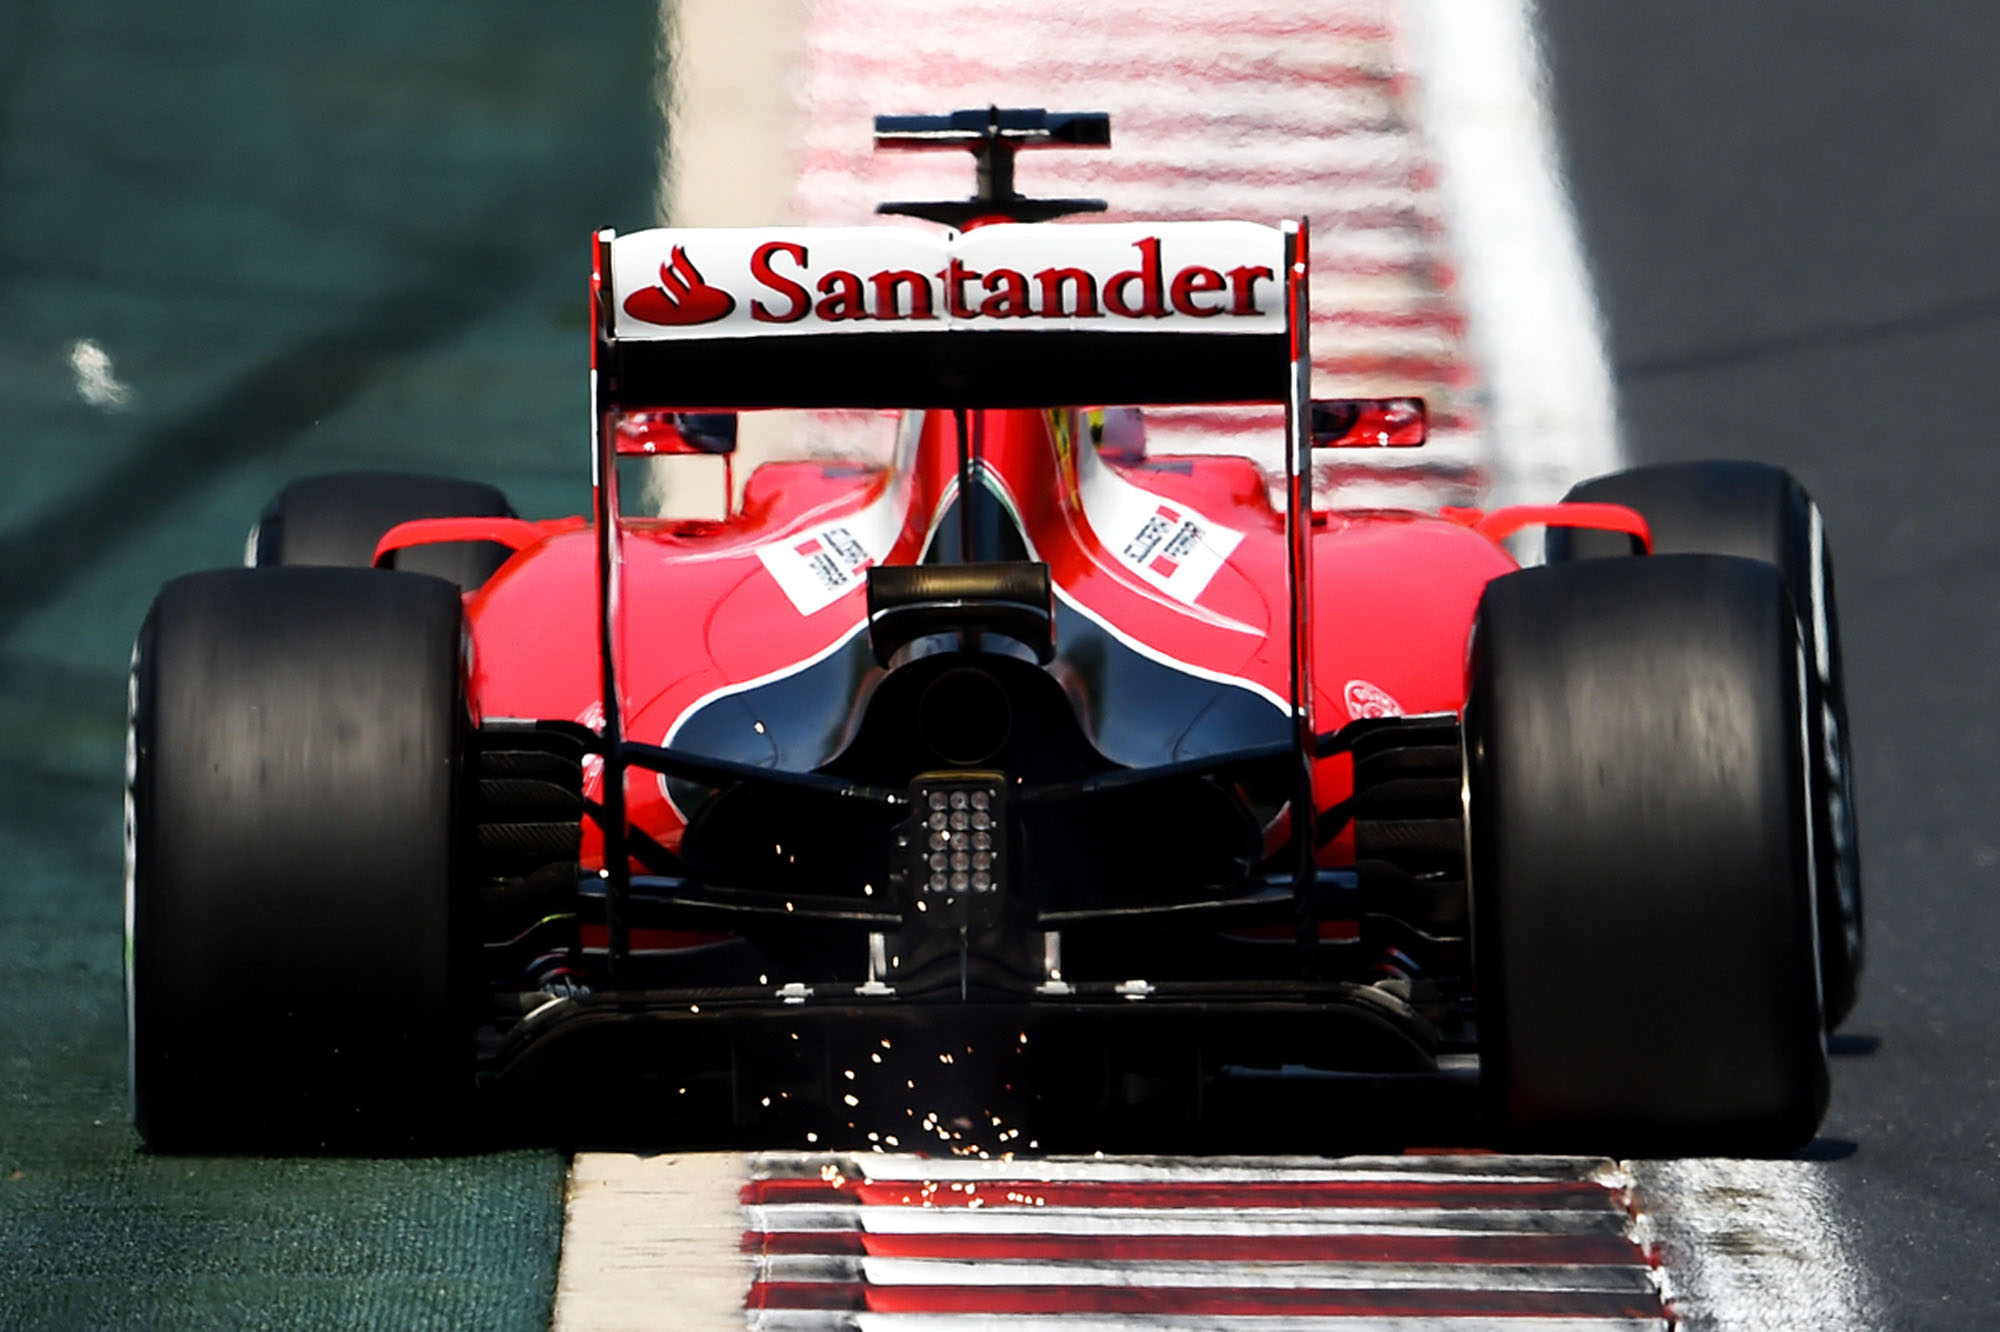 A Banco Santander SA logo is displayed on a Ferrari f1 car during practice for the Hungary Gran Prix.
